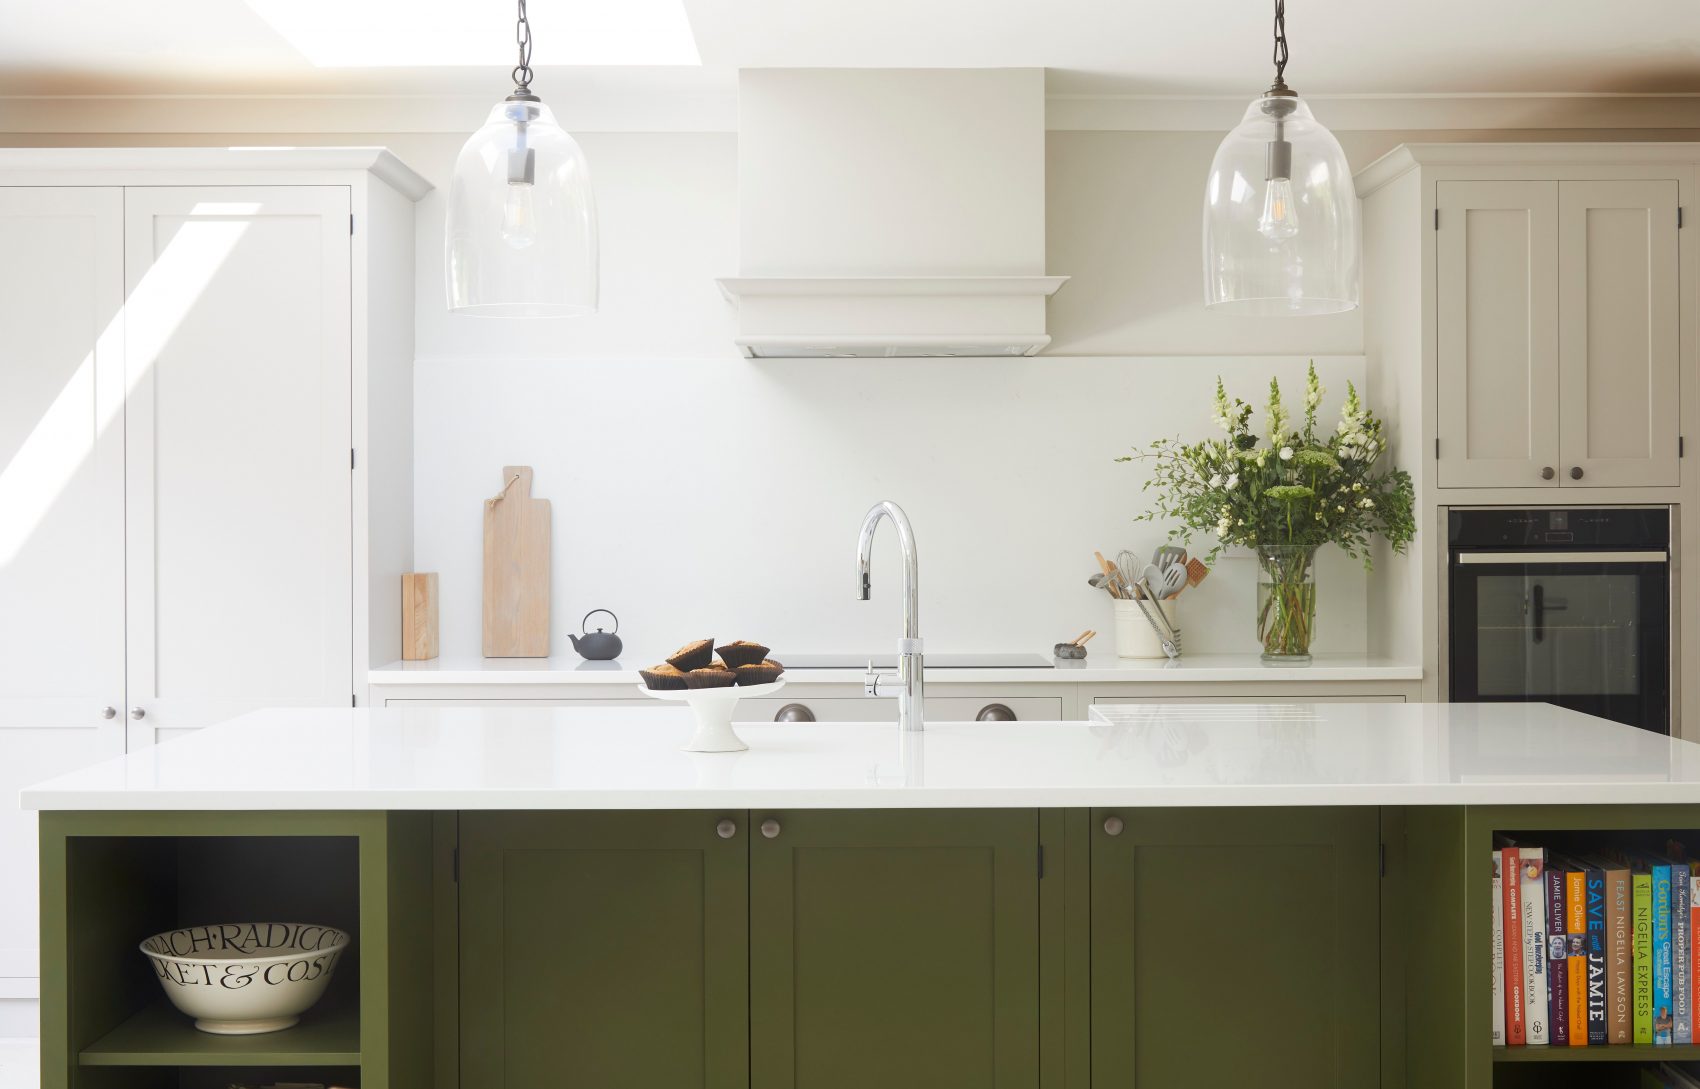 Designing The Green Kitchen Of Your Dreams